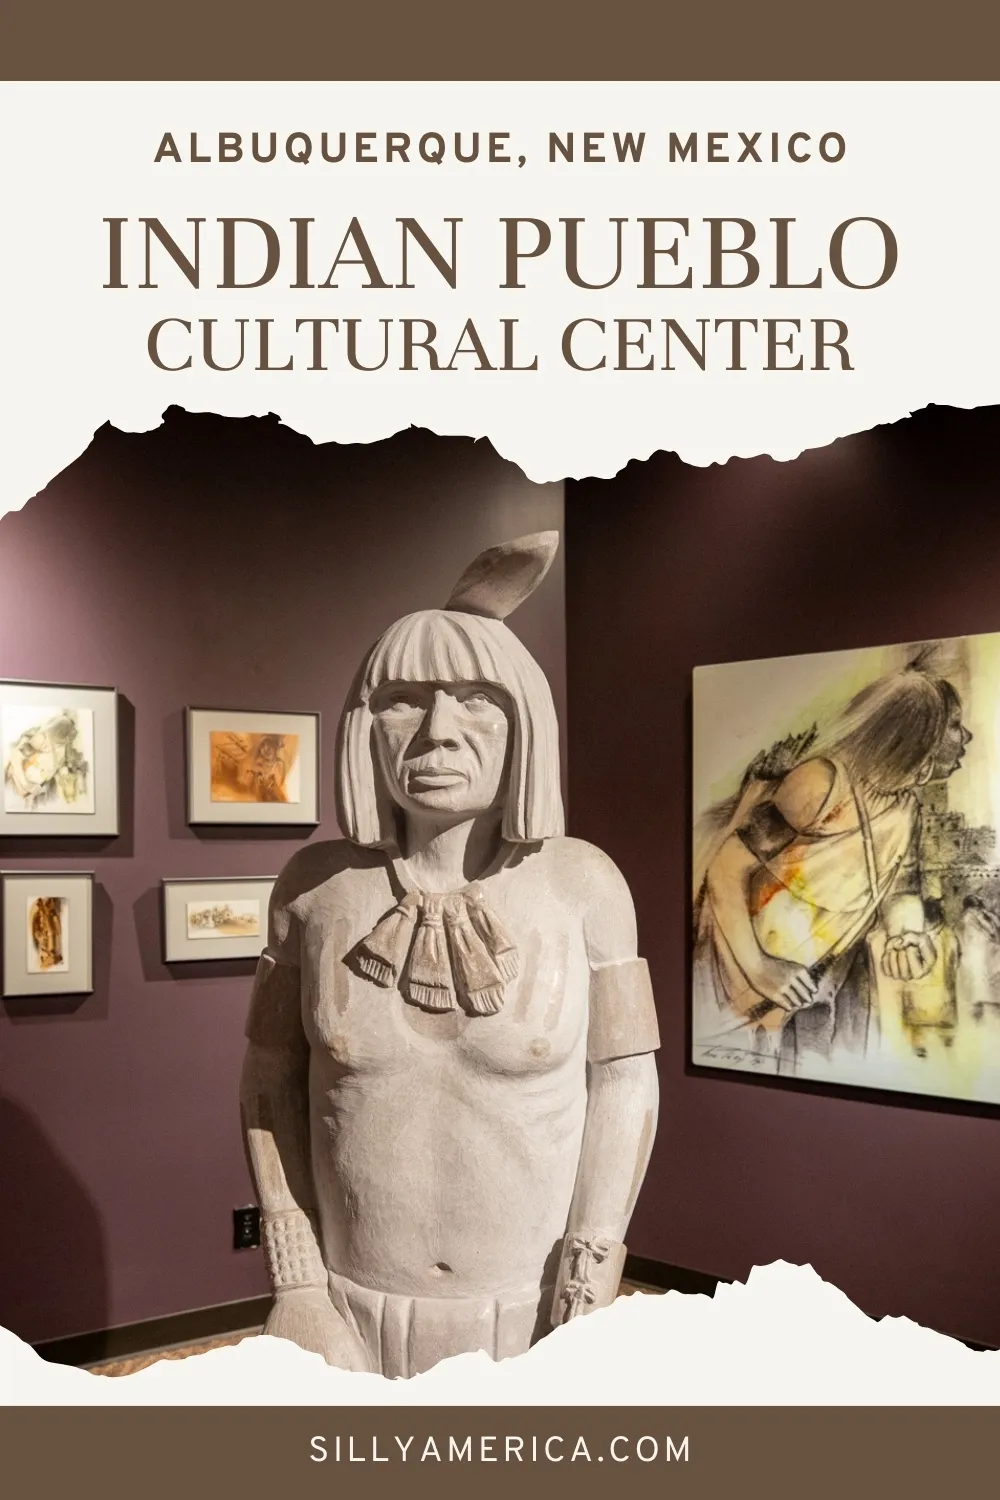 Indian Pueblo Cultural Center in Albuquerque, New Mexico is a wmuseum and cultural center that is dedicated to preserving and displaying Pueblo history and culture. It opened in August 1976 with the mission “to preserve and perpetuate Pueblo culture and to advance understanding by presenting with dignity and respect, the accomplishments and evolving history of the Puebloan peoples of New Mexico.” #NewMexico #NewMexicoMuseum #NewMexicoRoadTrip